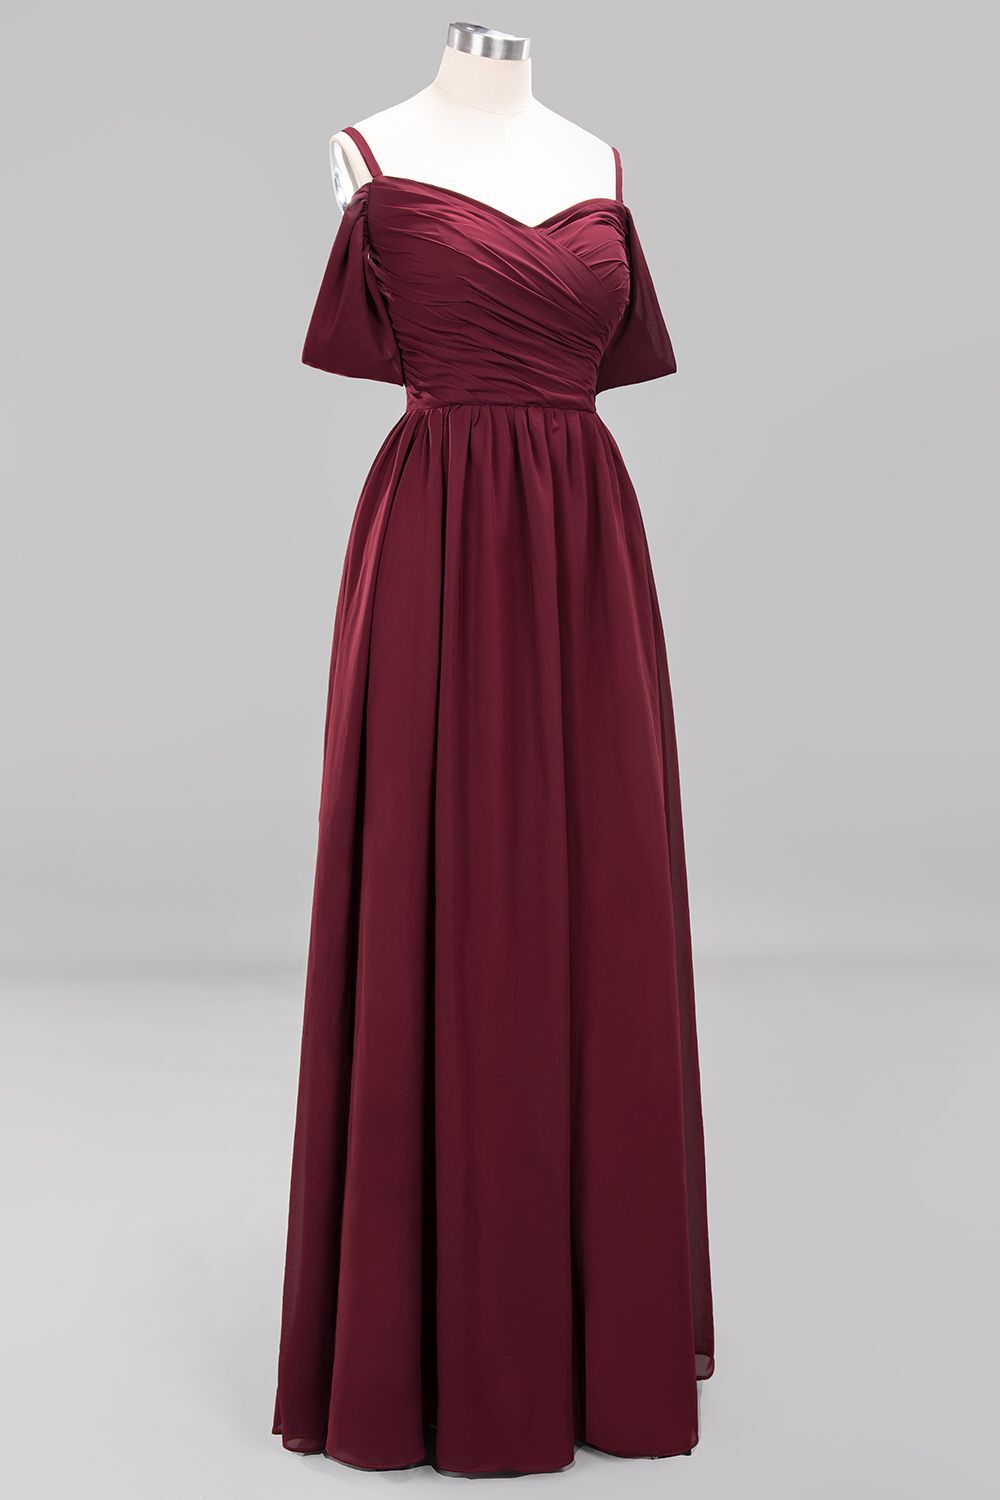 Off the Shoulder Wine Red Chiffon A-line Long Bridesmaid Dress